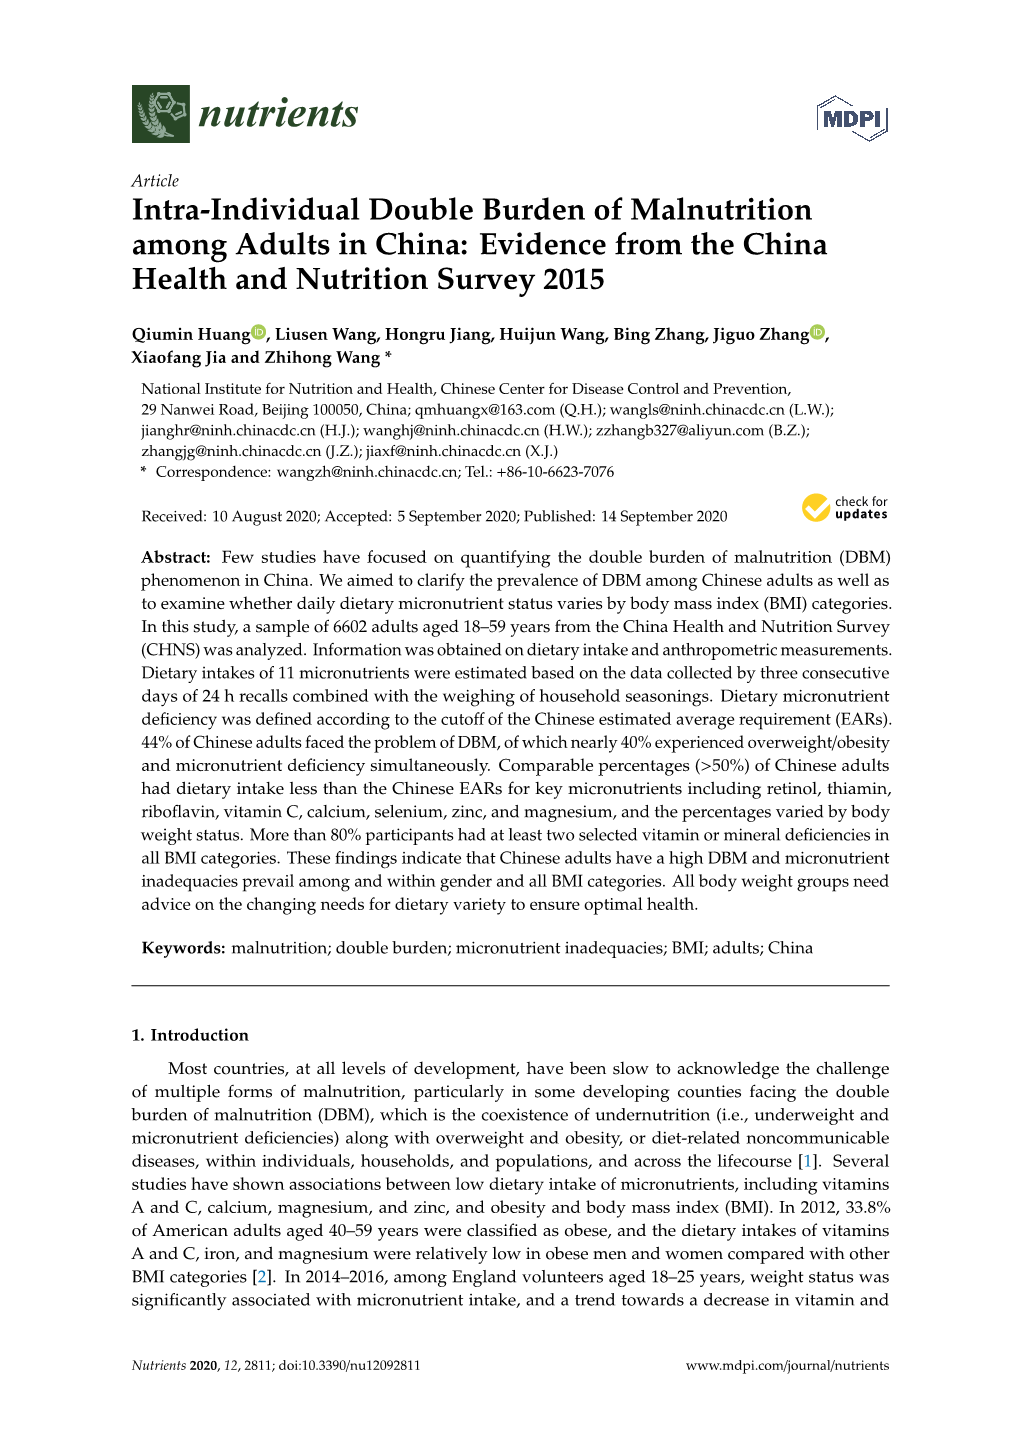 Intra-Individual Double Burden of Malnutrition Among Adults in China: Evidence from the China Health and Nutrition Survey 2015